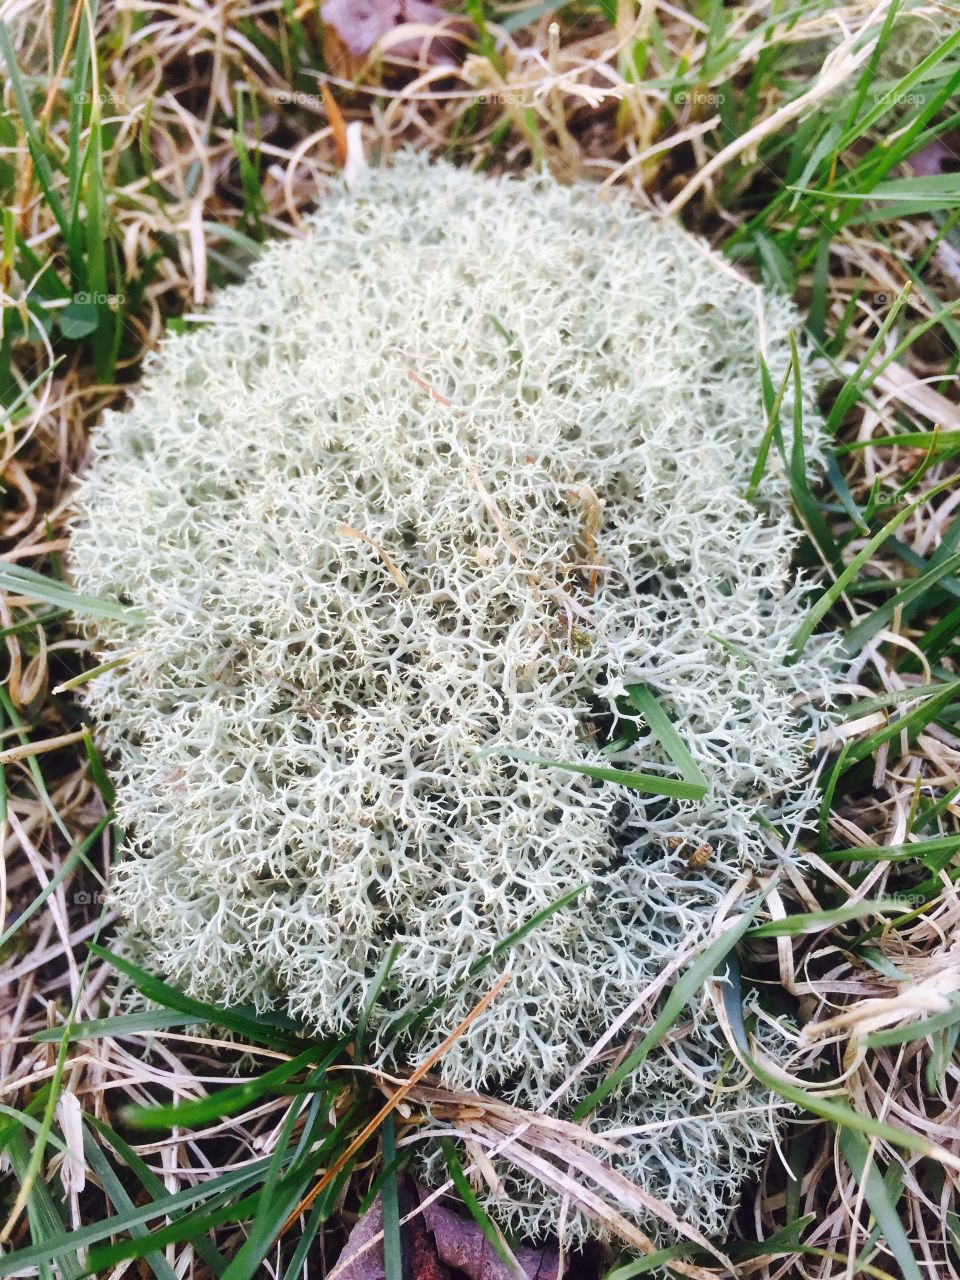 White moss growing in the ground
Upstate New York 